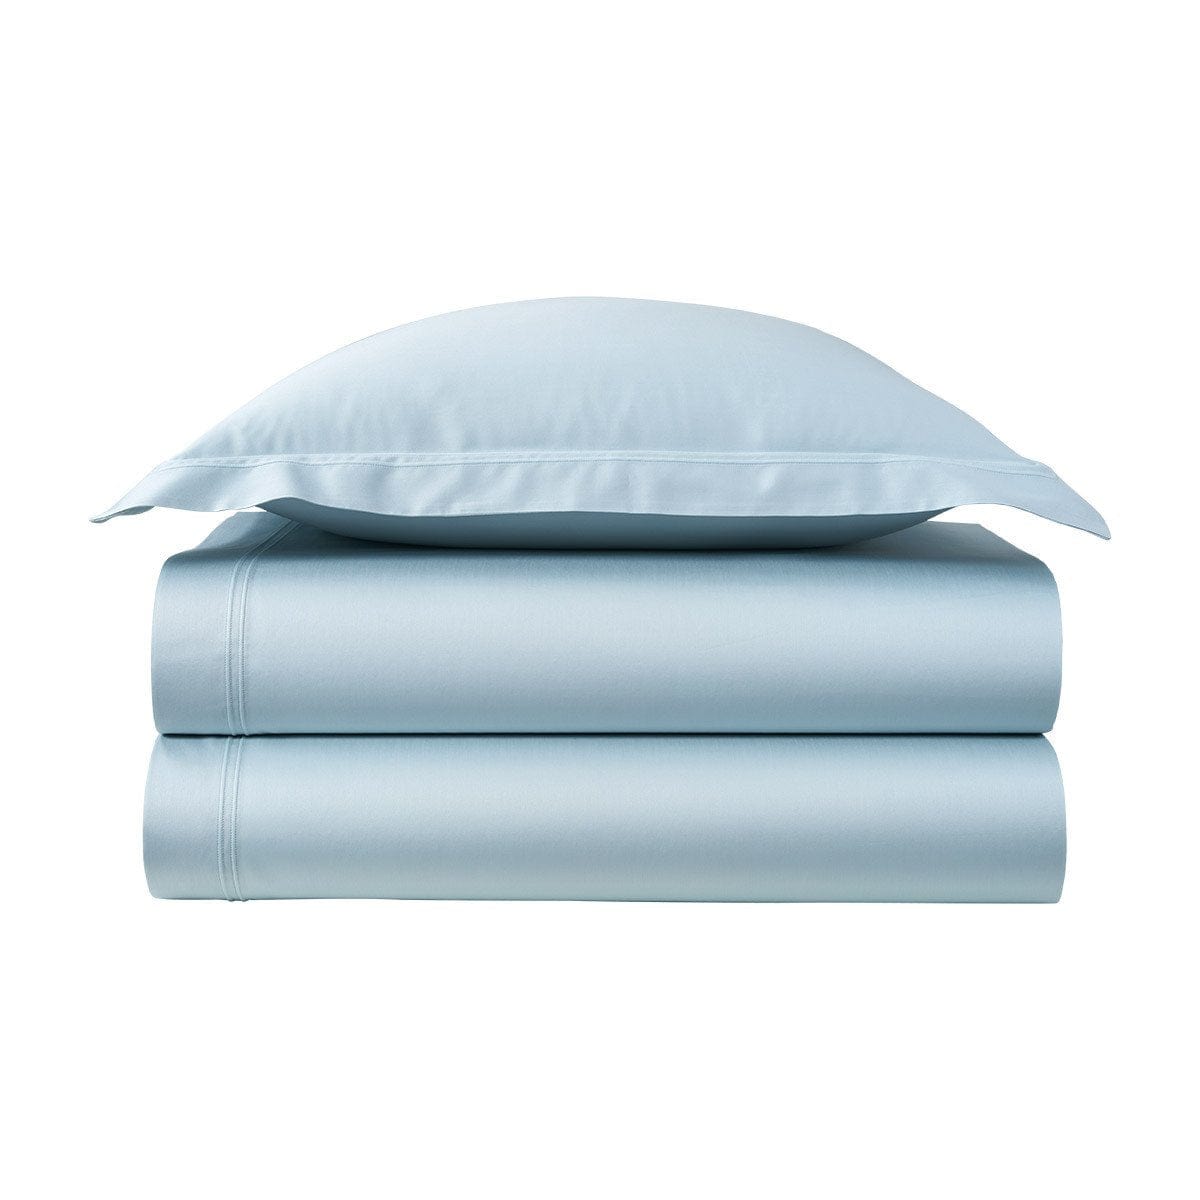 Pillowcases Triomphe Pillowcase by Yves Delorme Yves Delorme